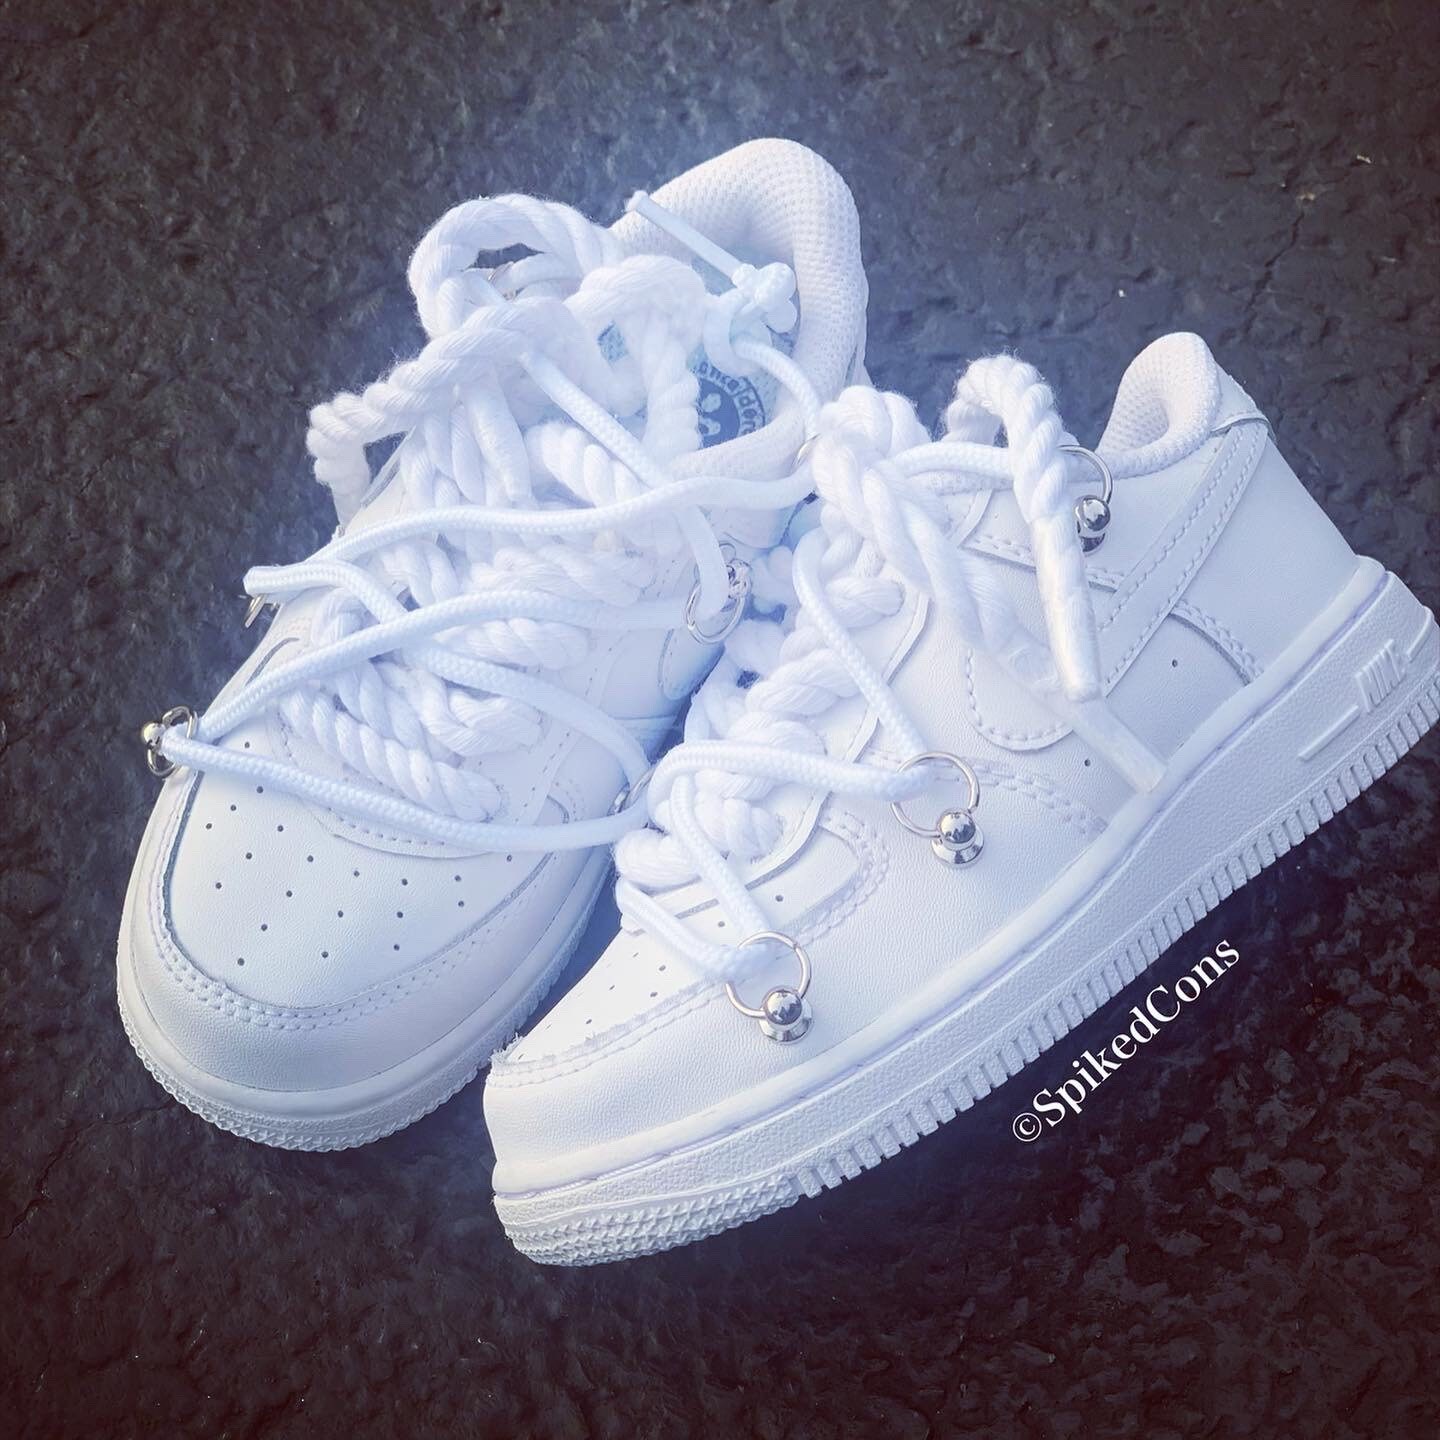 Custom All White AF1 Rope Laces toddler /kid Sizes 